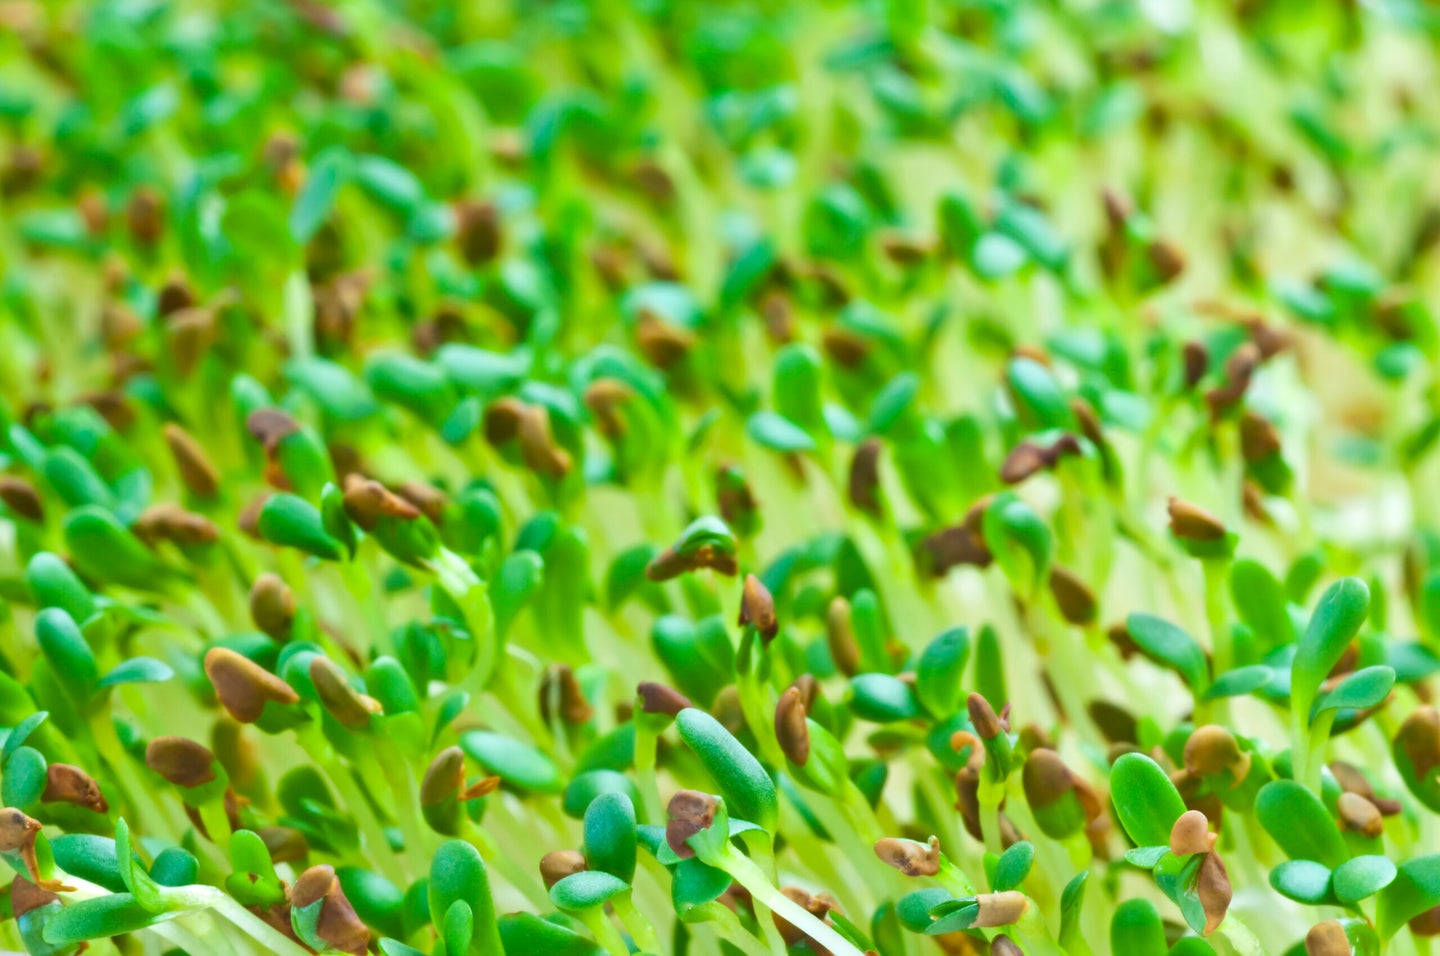 Alfalfa sprouts have the potential to grow in Martian soil.